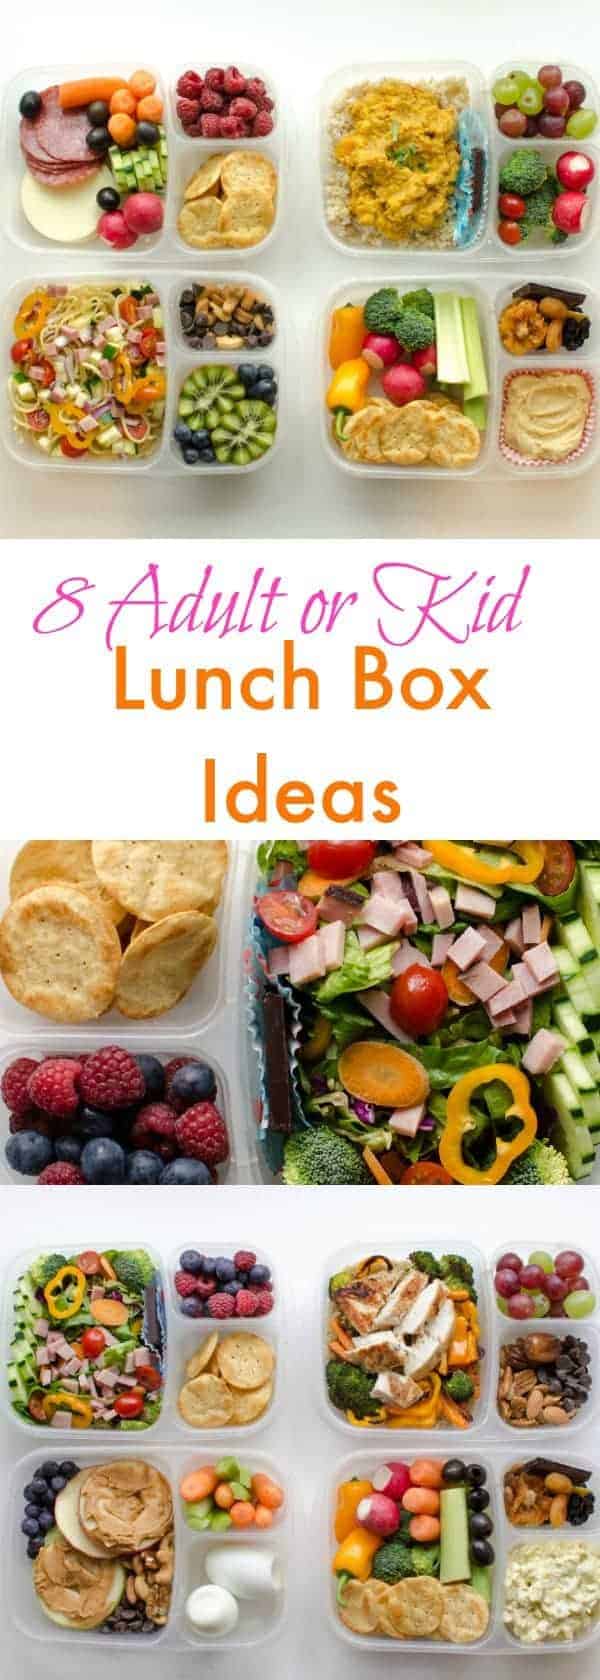 15 Awesomely Homemade Adult Lunch Bags